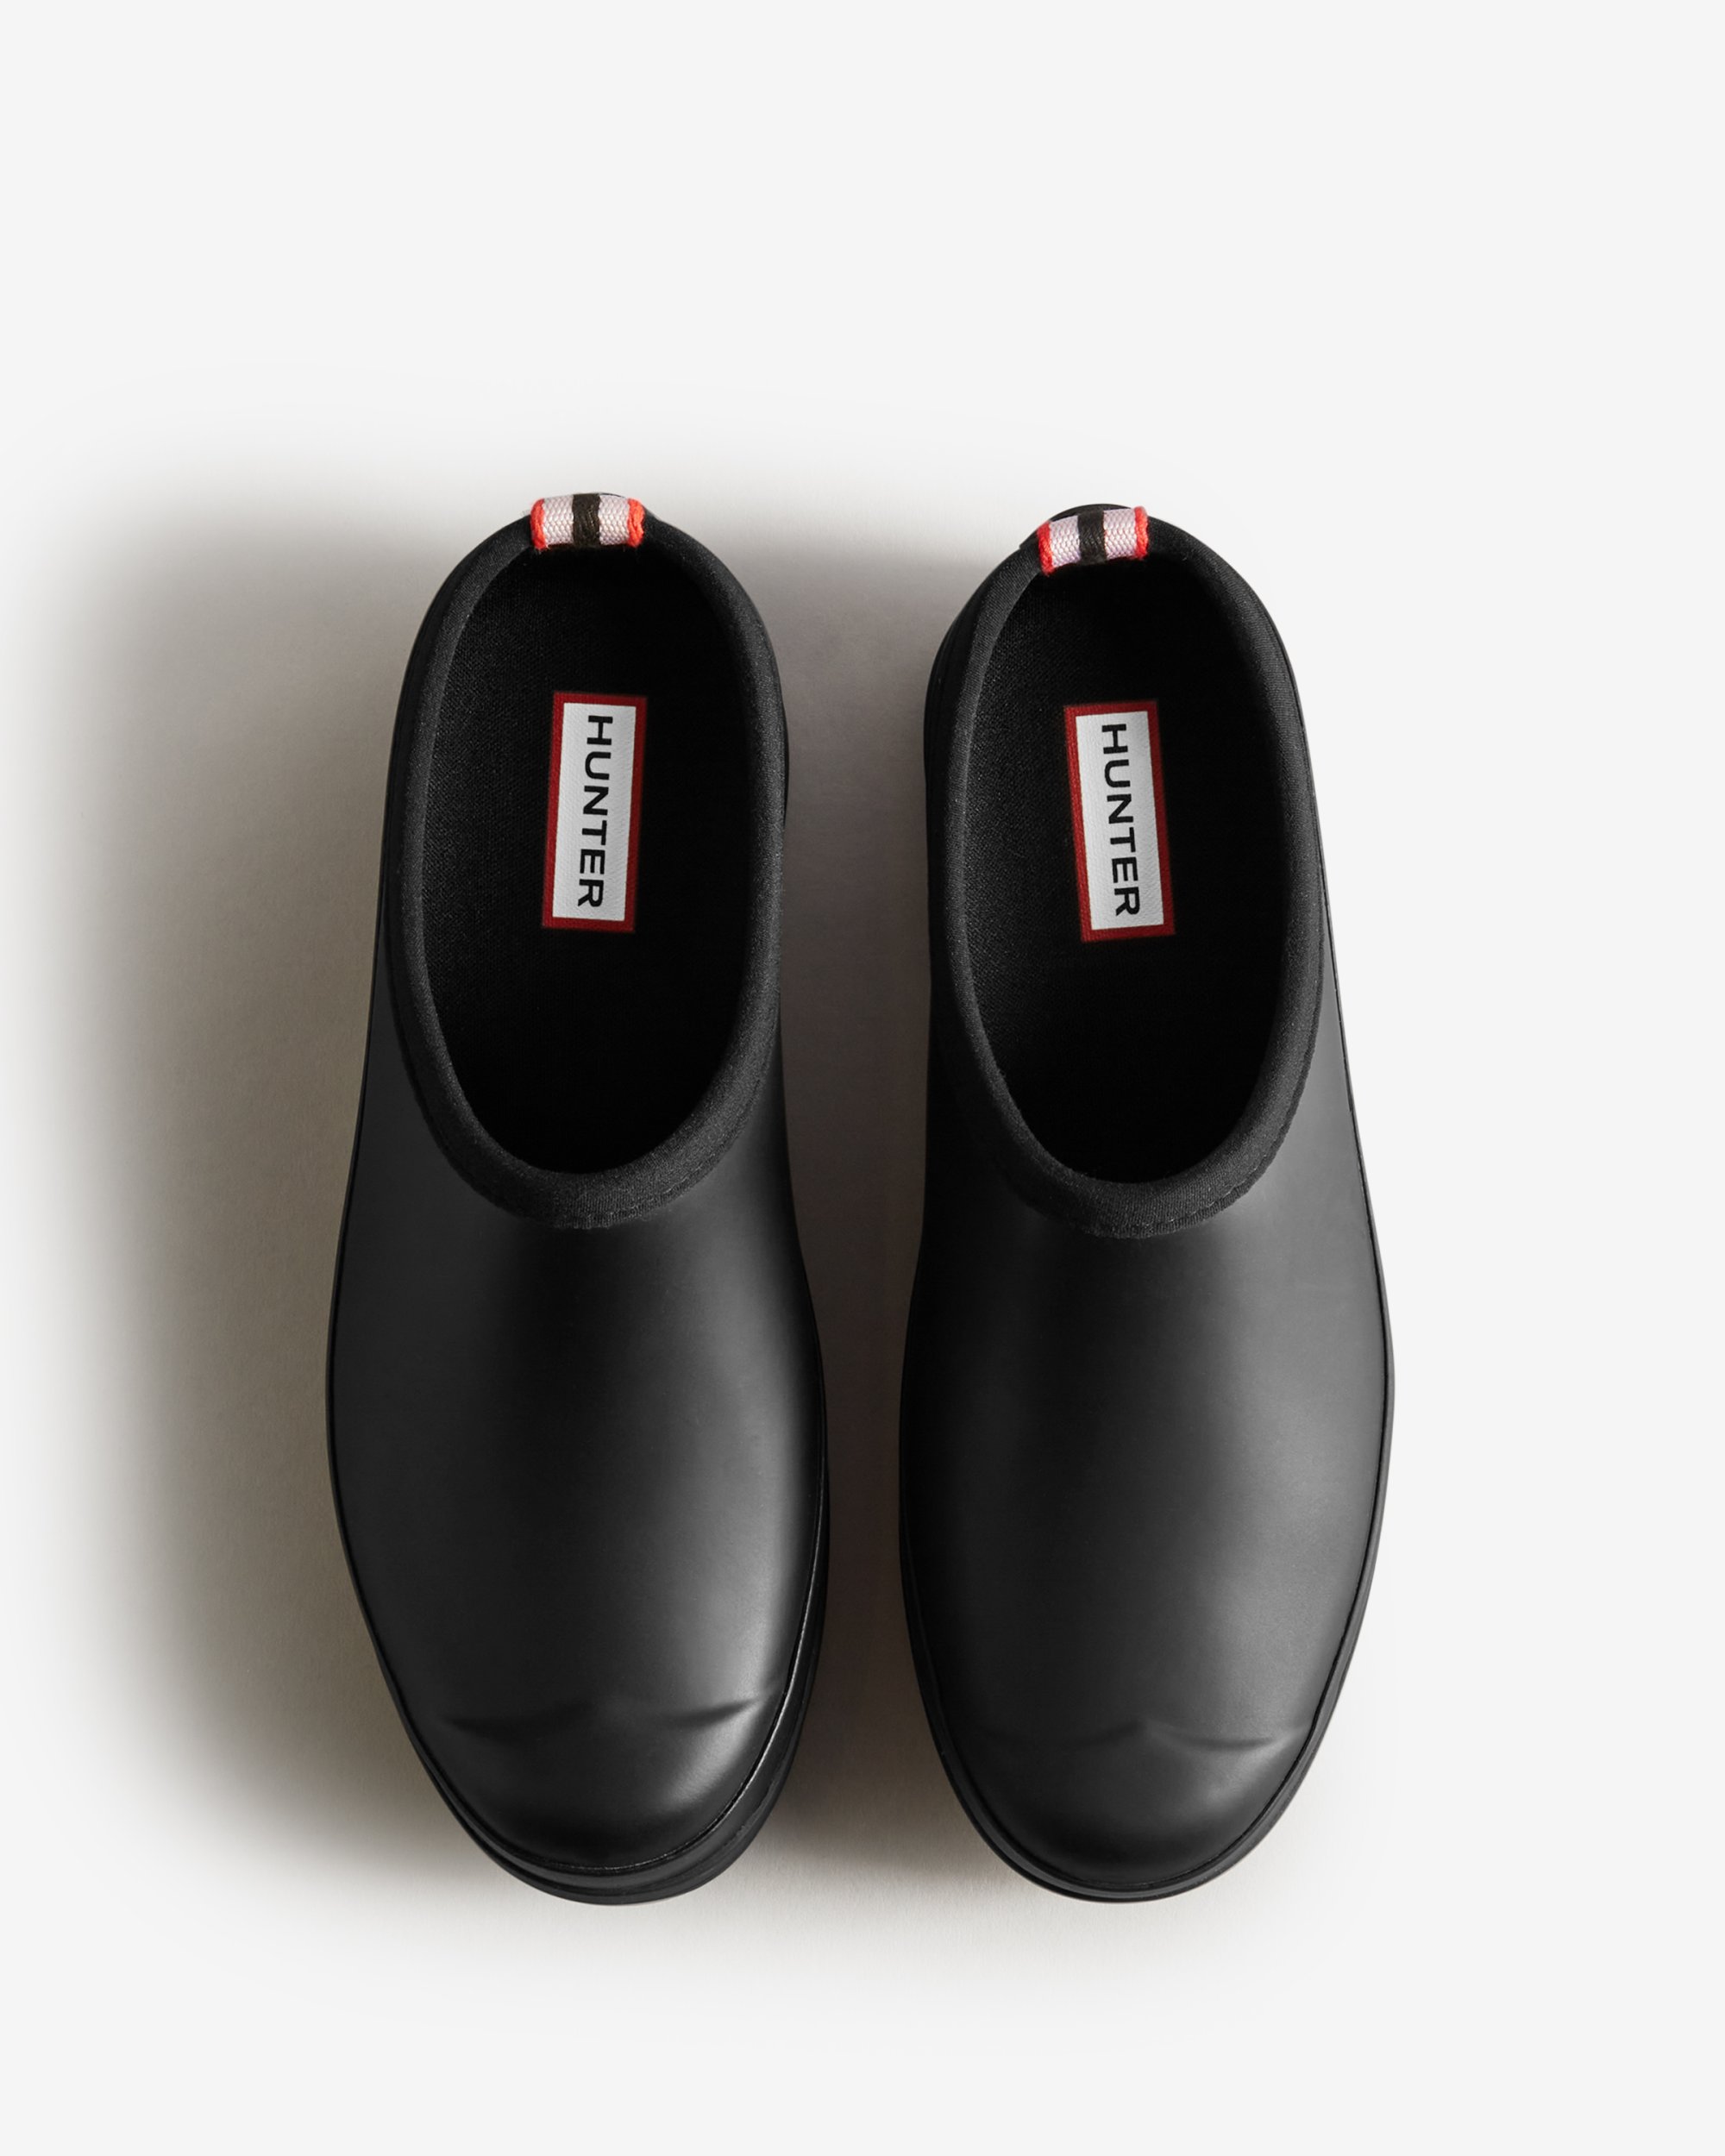 W Play Clog-black Black - Welcome to Apple Saddlery | www.applesaddlery.com  | Family Owned Since 1972